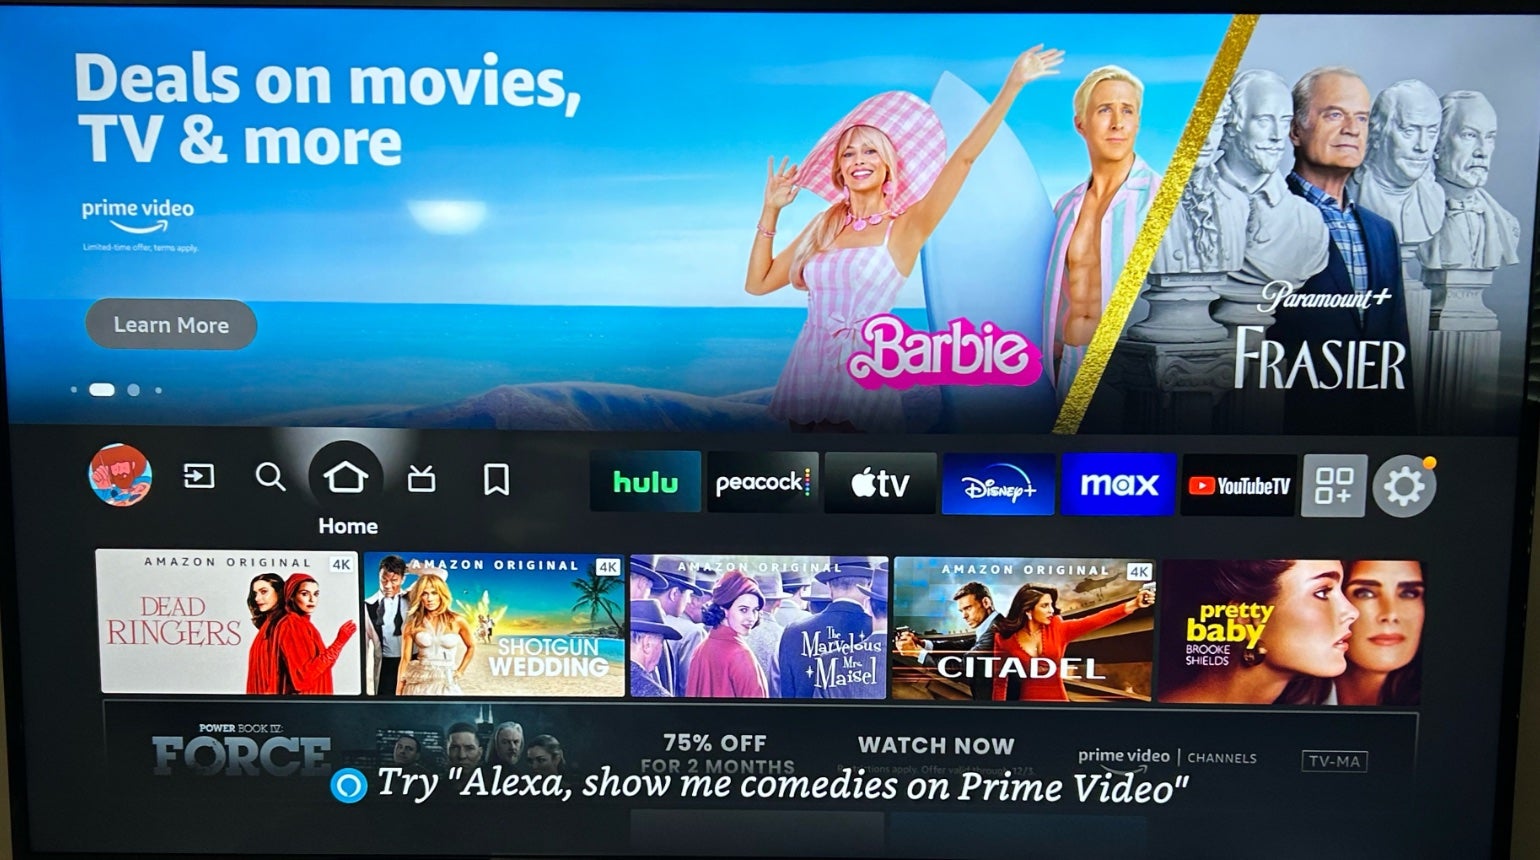 Over the Thanksgiving holiday, Fire TV introduced full-screen, autoplay ads on its homepage.